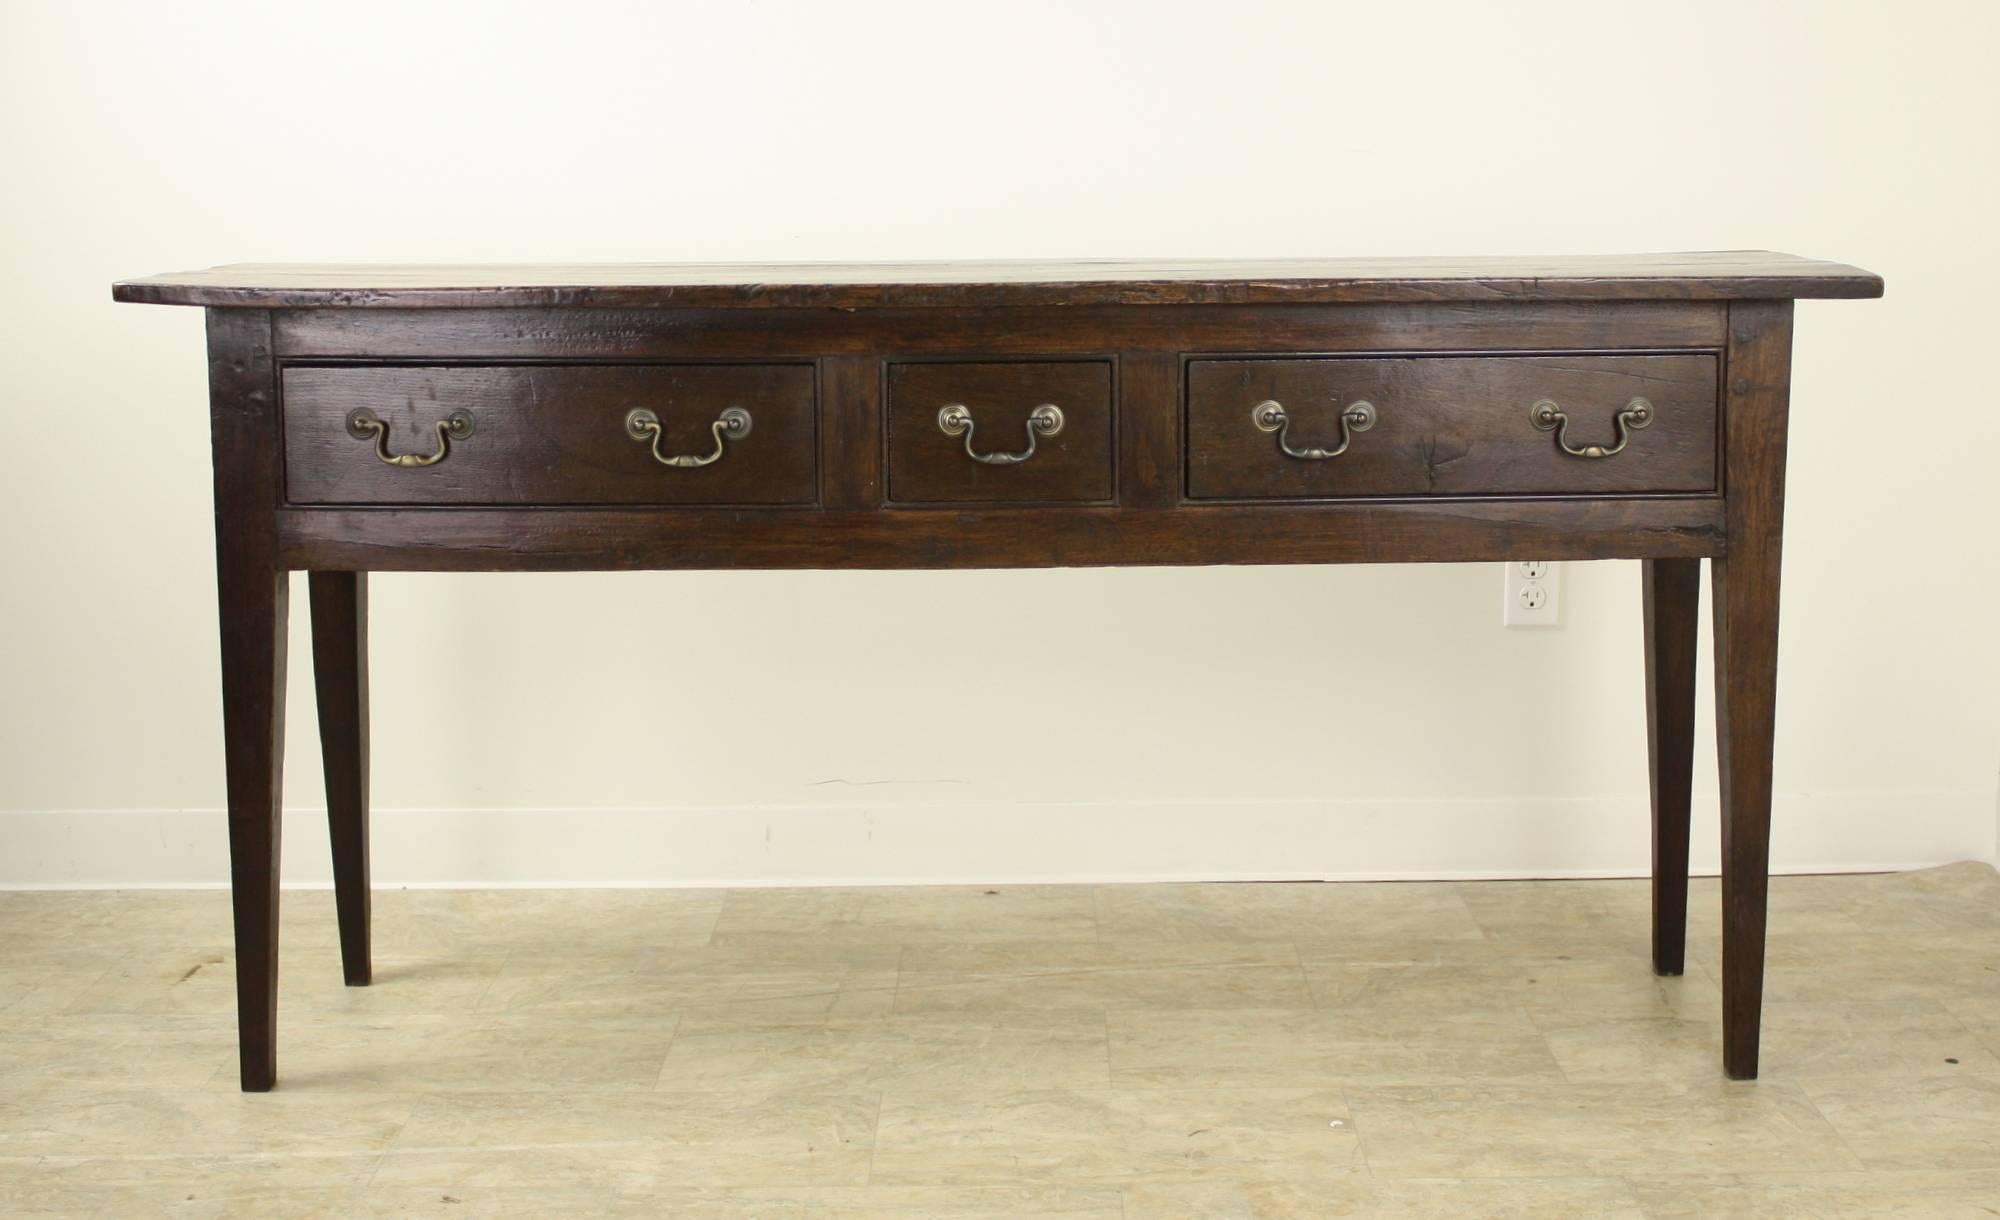 This richly colored dark chestnut piece is a very impressive long console table. Three drawers include a charming small center drawer. Legs are classic long and tapered country style, with sturdy pegs. Tho longer, the depth of this server is narrow,